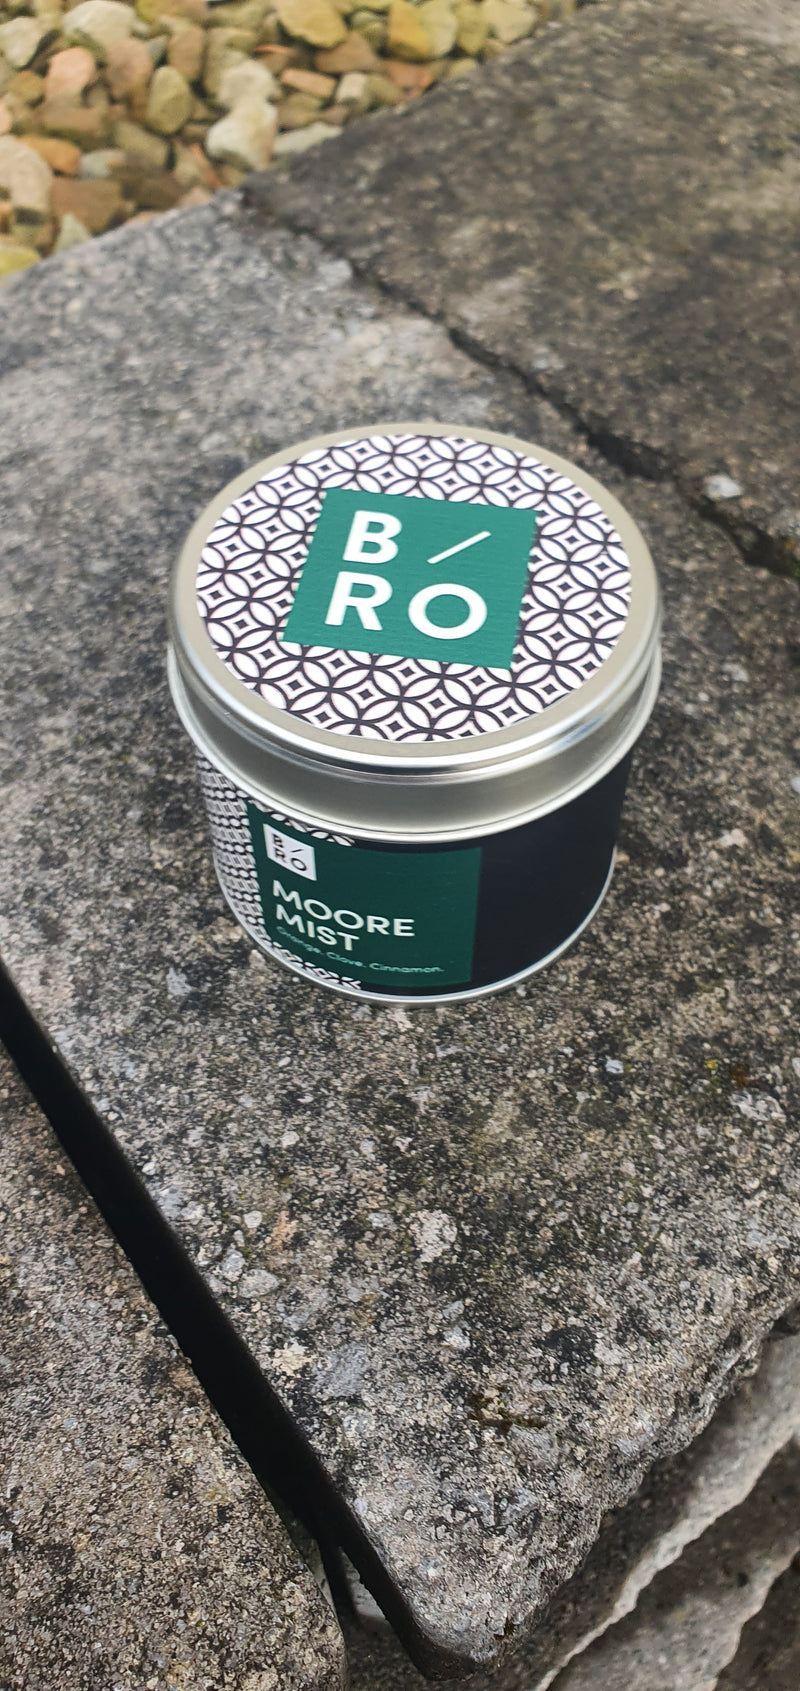 Bro Moore Mist Candle 40hrs